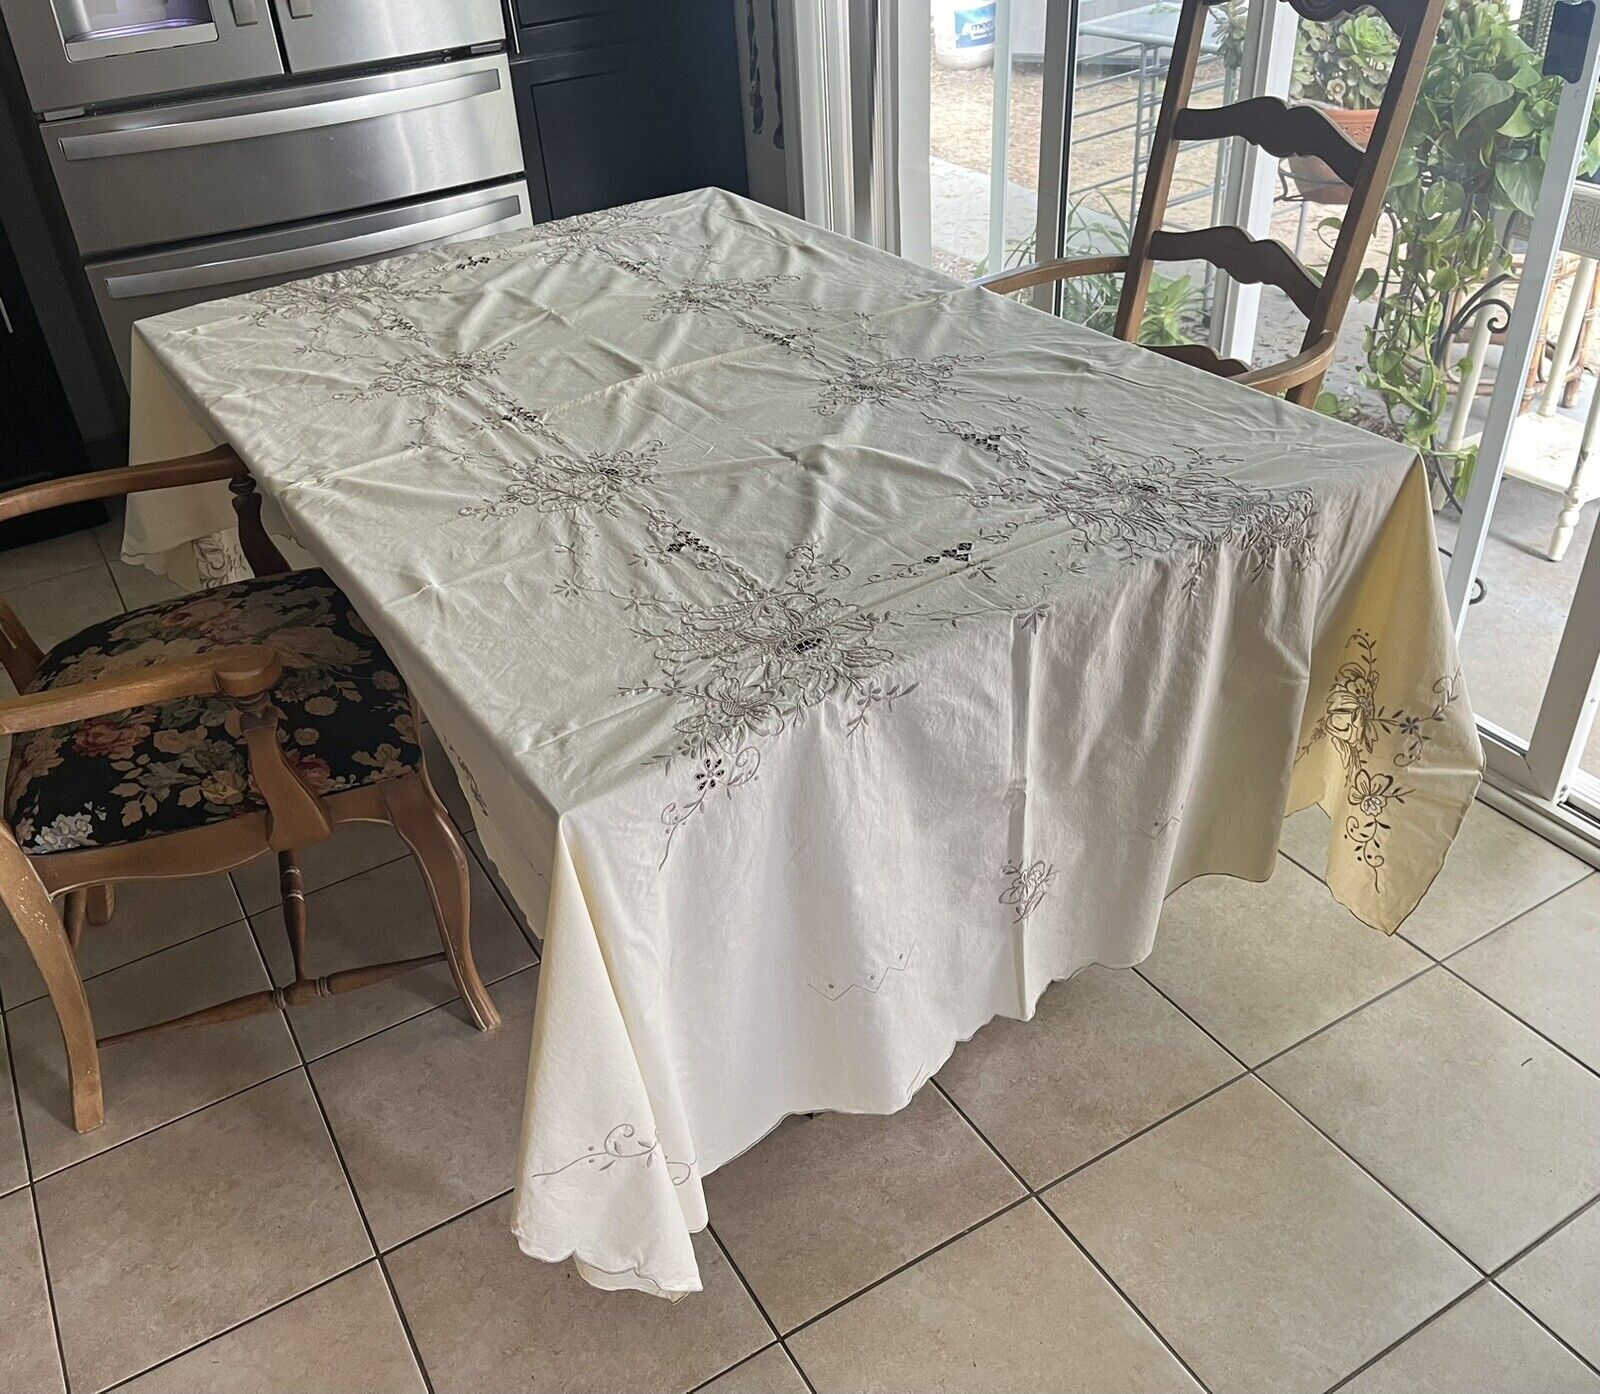 Vintage Embroidered Extra Large Tablecloth Banquet Size Rectangular 66 X 100”